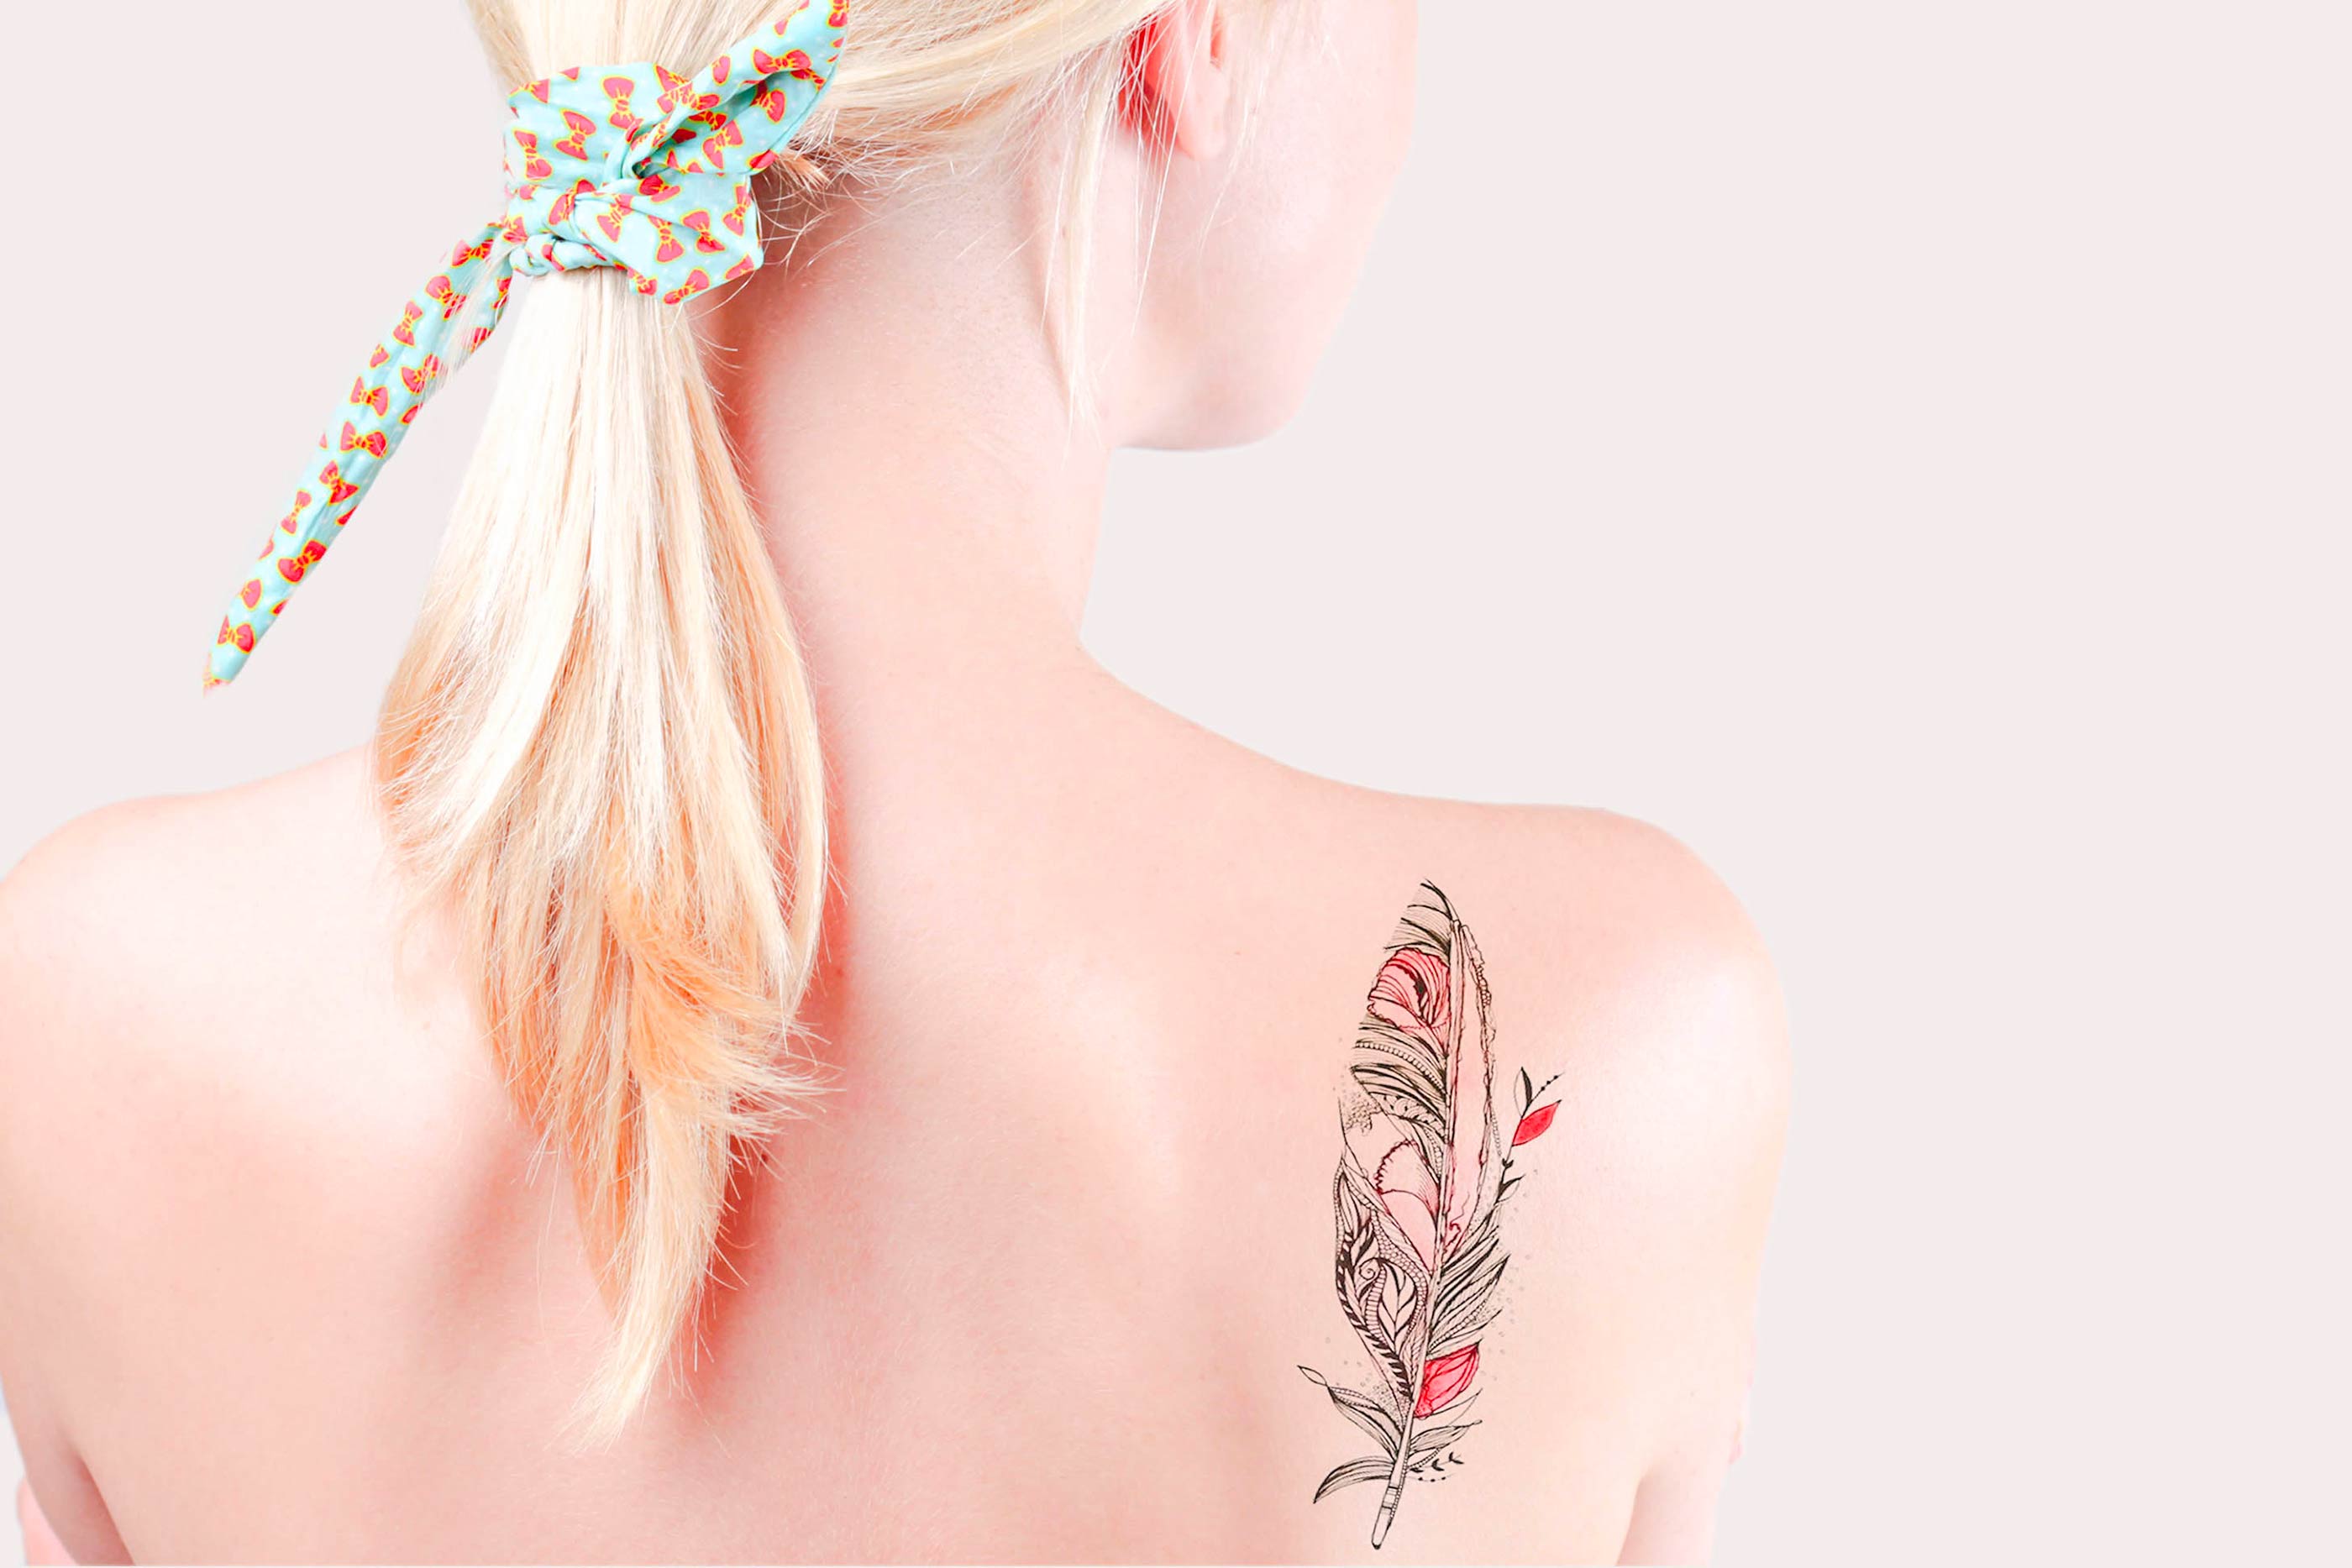 THE SPECIALISTS IN TATTOO REMOVAL